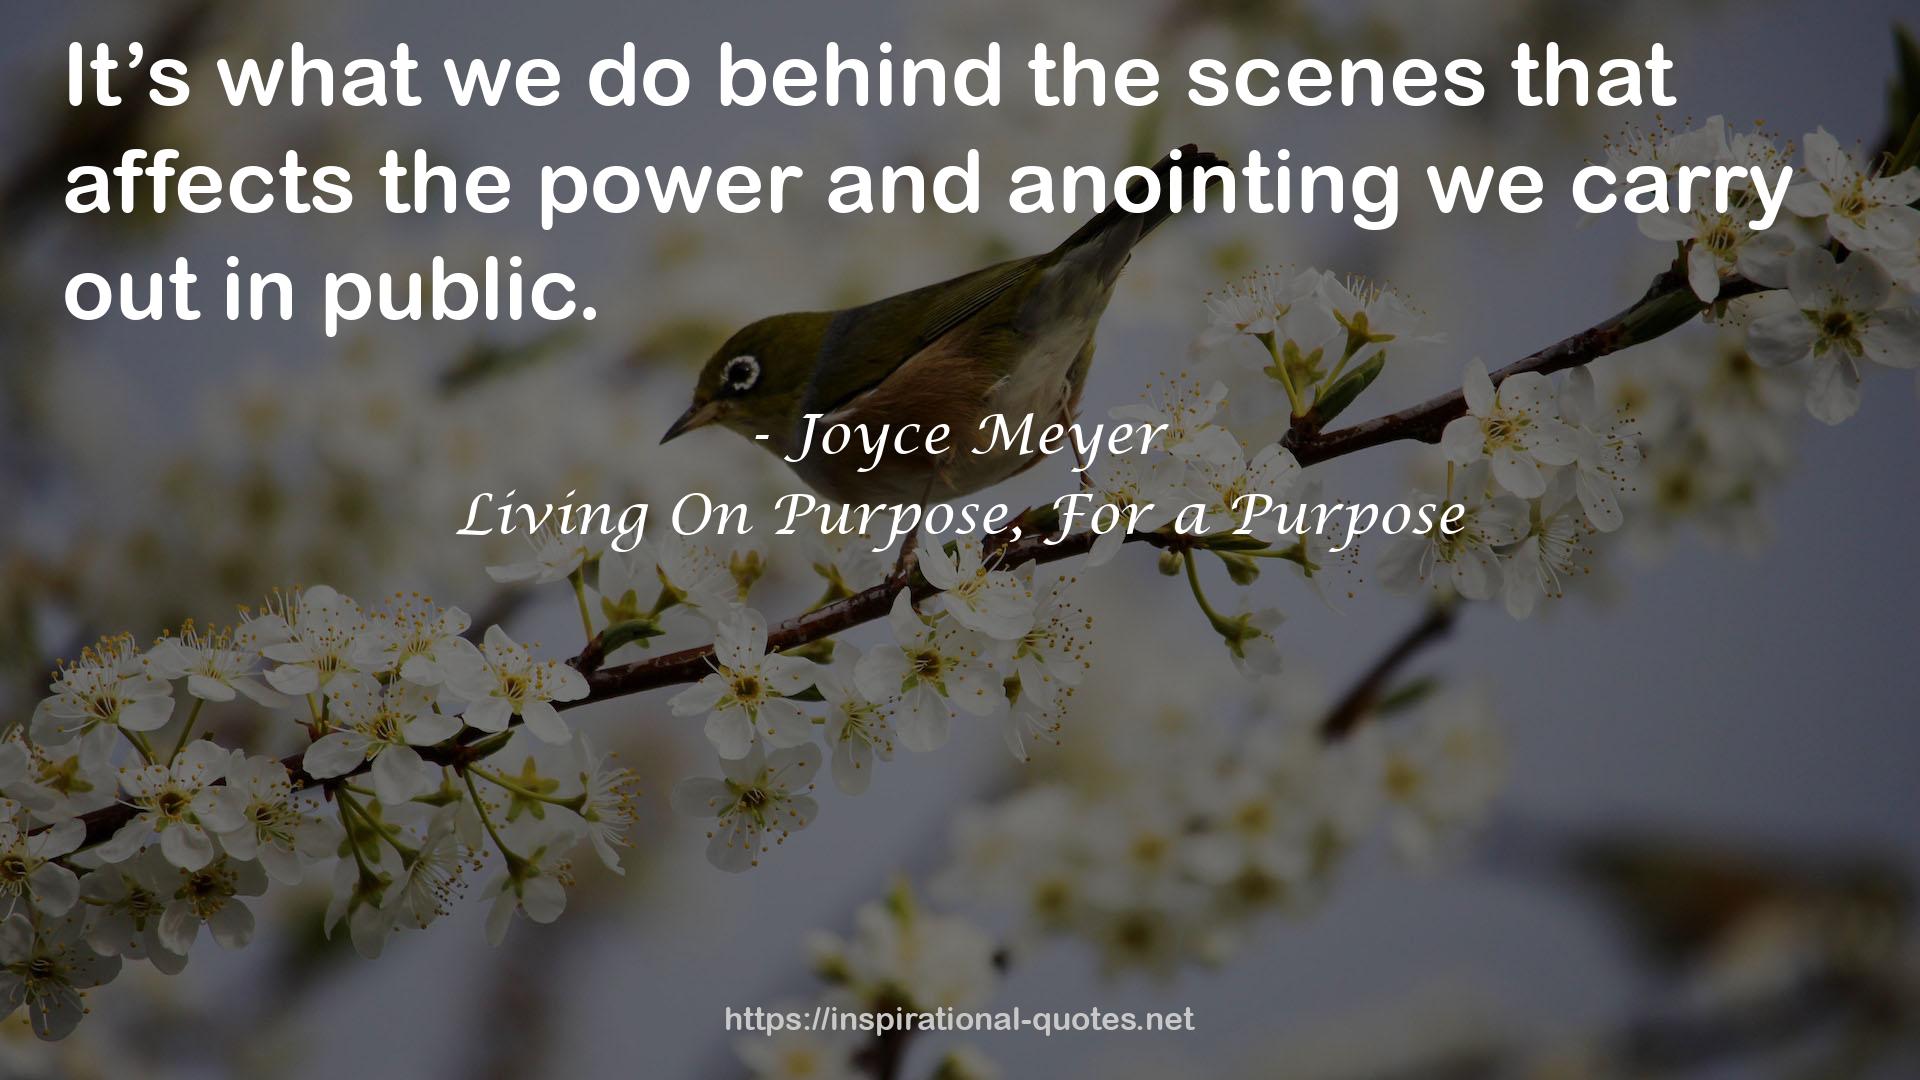 Living On Purpose, For a Purpose QUOTES